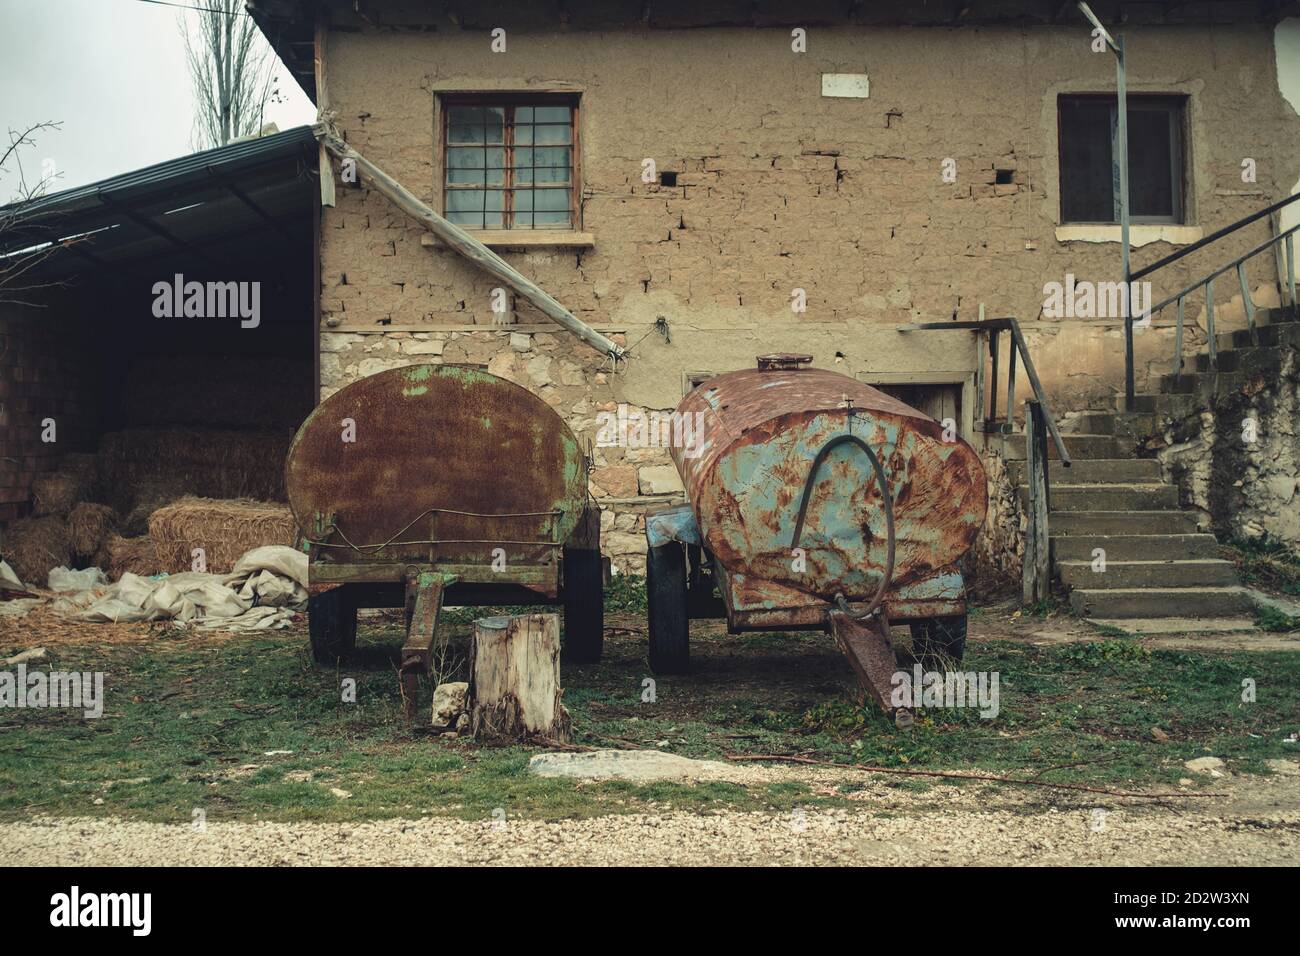 Antalya, Turkey – 23rd February 2020: Old rusty water tanks on the wheels Two aged tanks in front of the house. Stock Photo